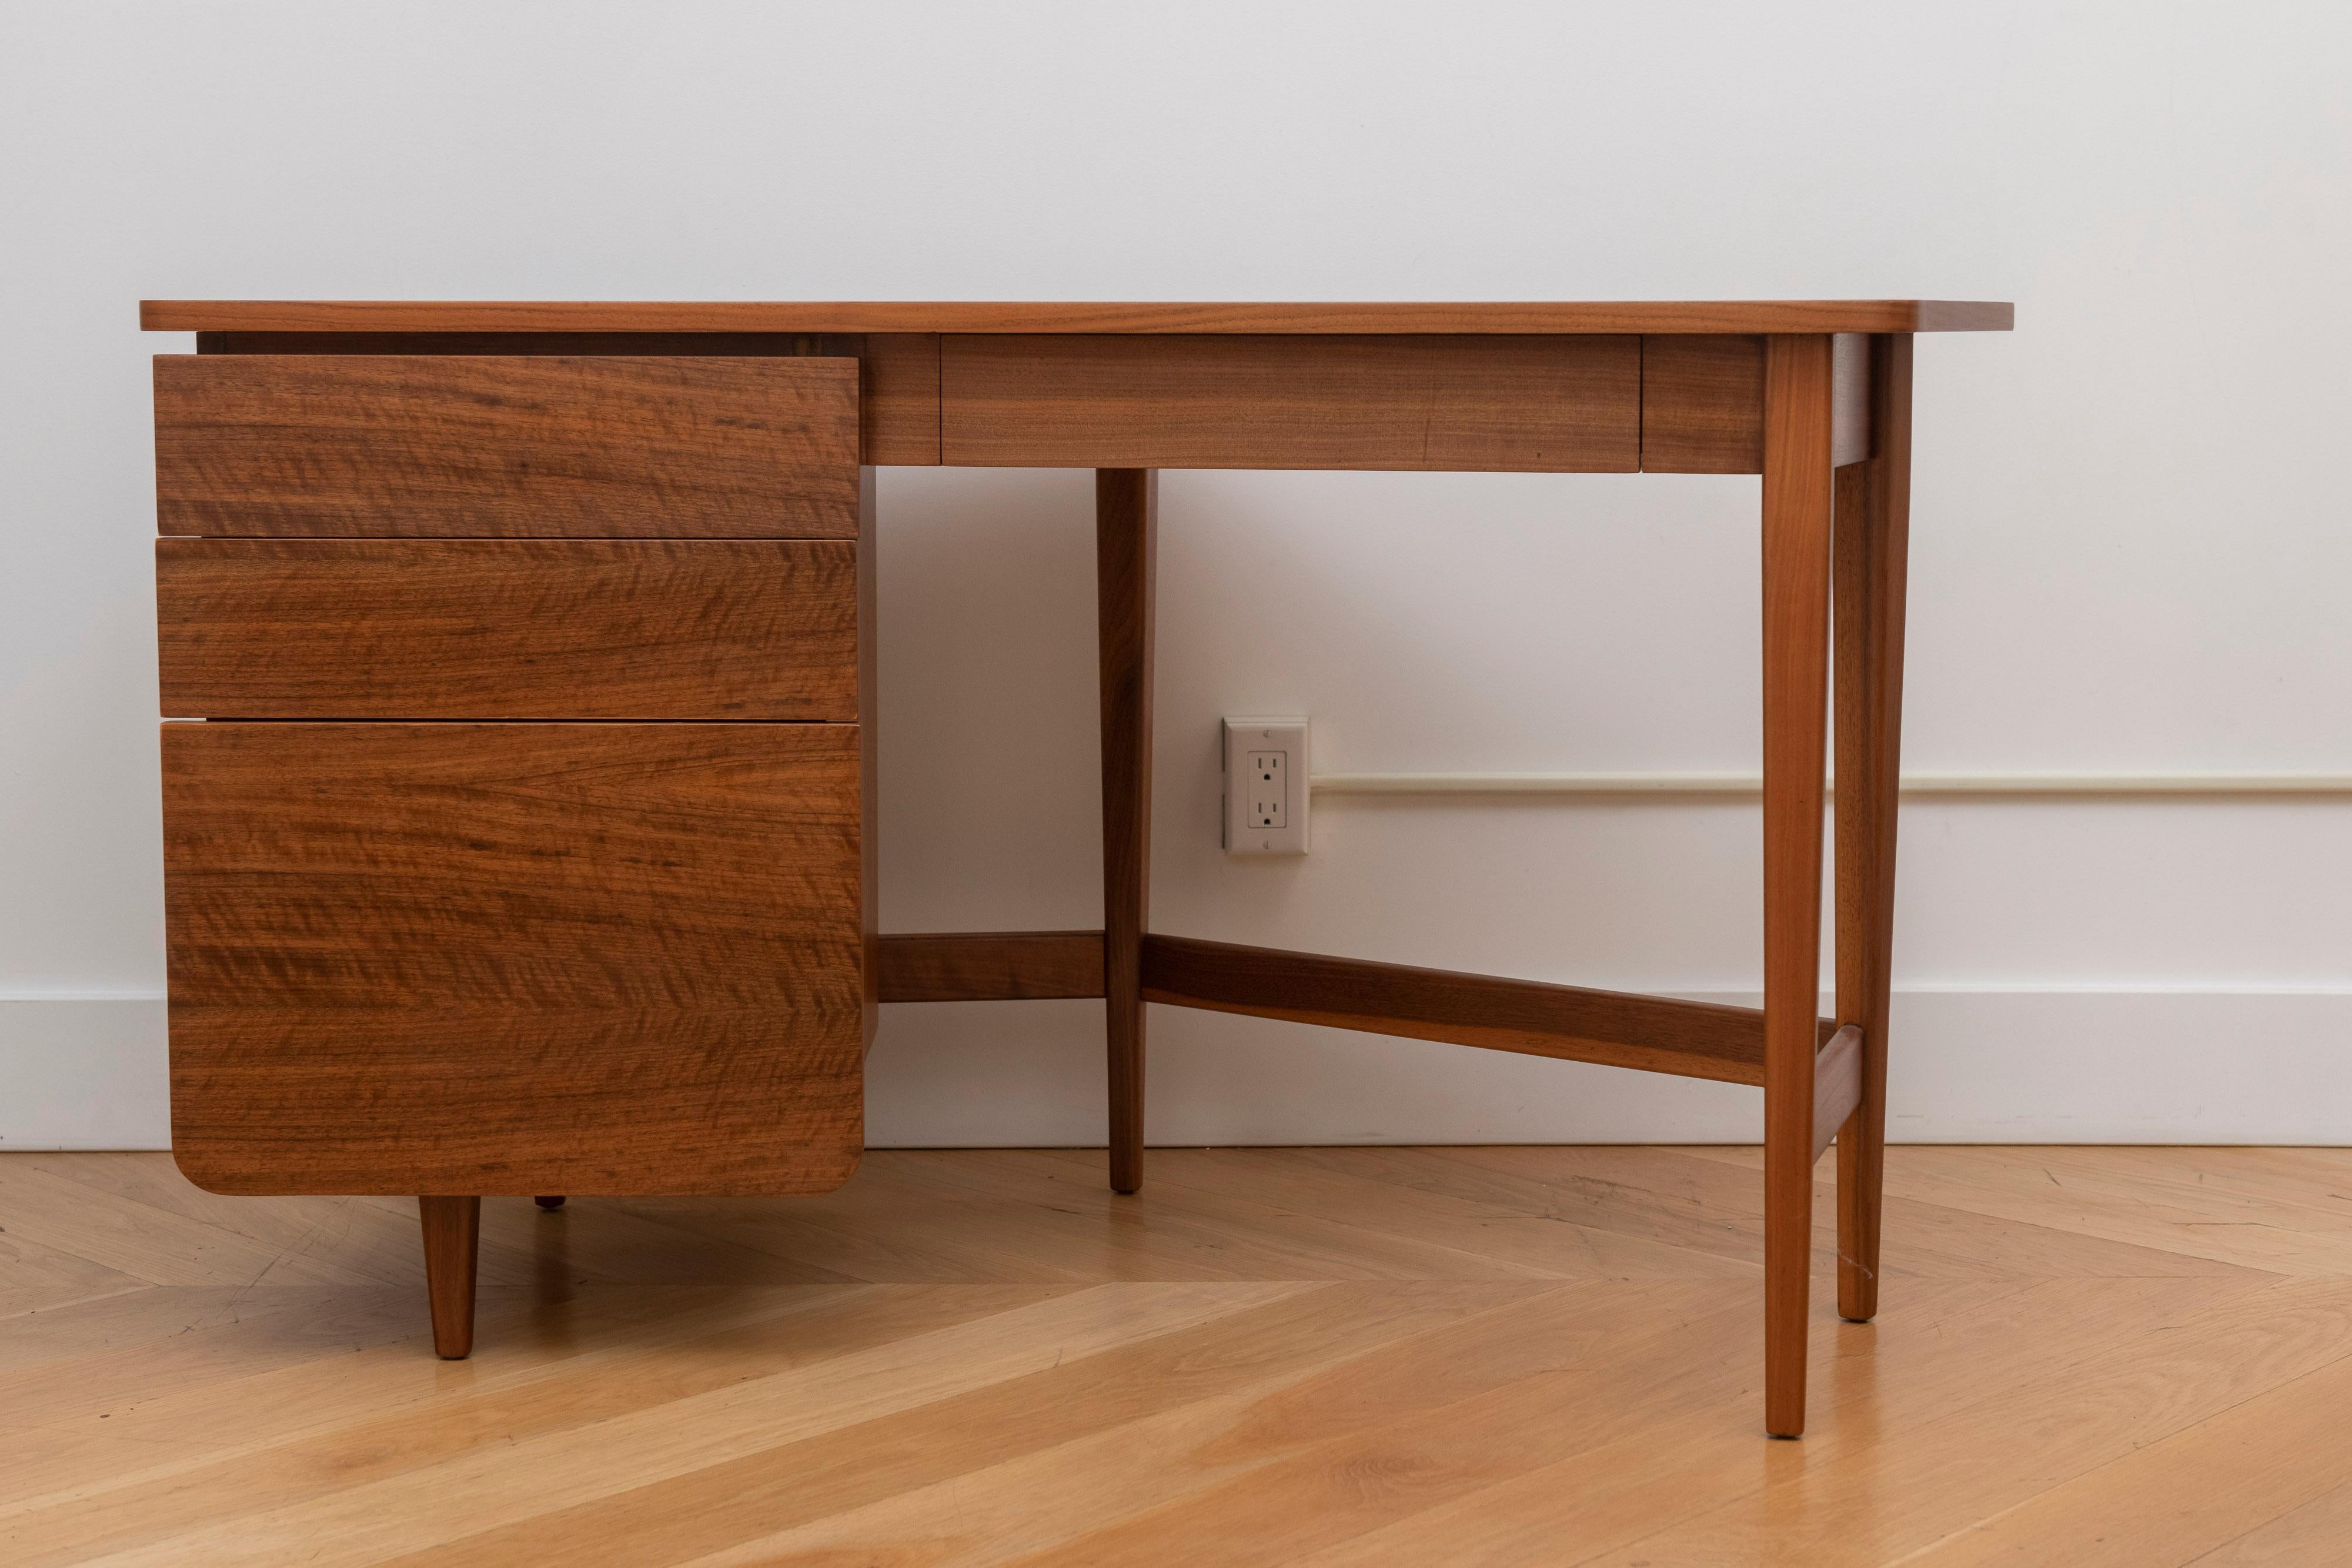 This is a rare and elegant modern desk, designed by Bertha Schaefer for Singer and Sons, circa 1950s. Beautiful graining to the Italian walnut, especially to the top. Schaefer was one of the leading female designers of the era, and designed this